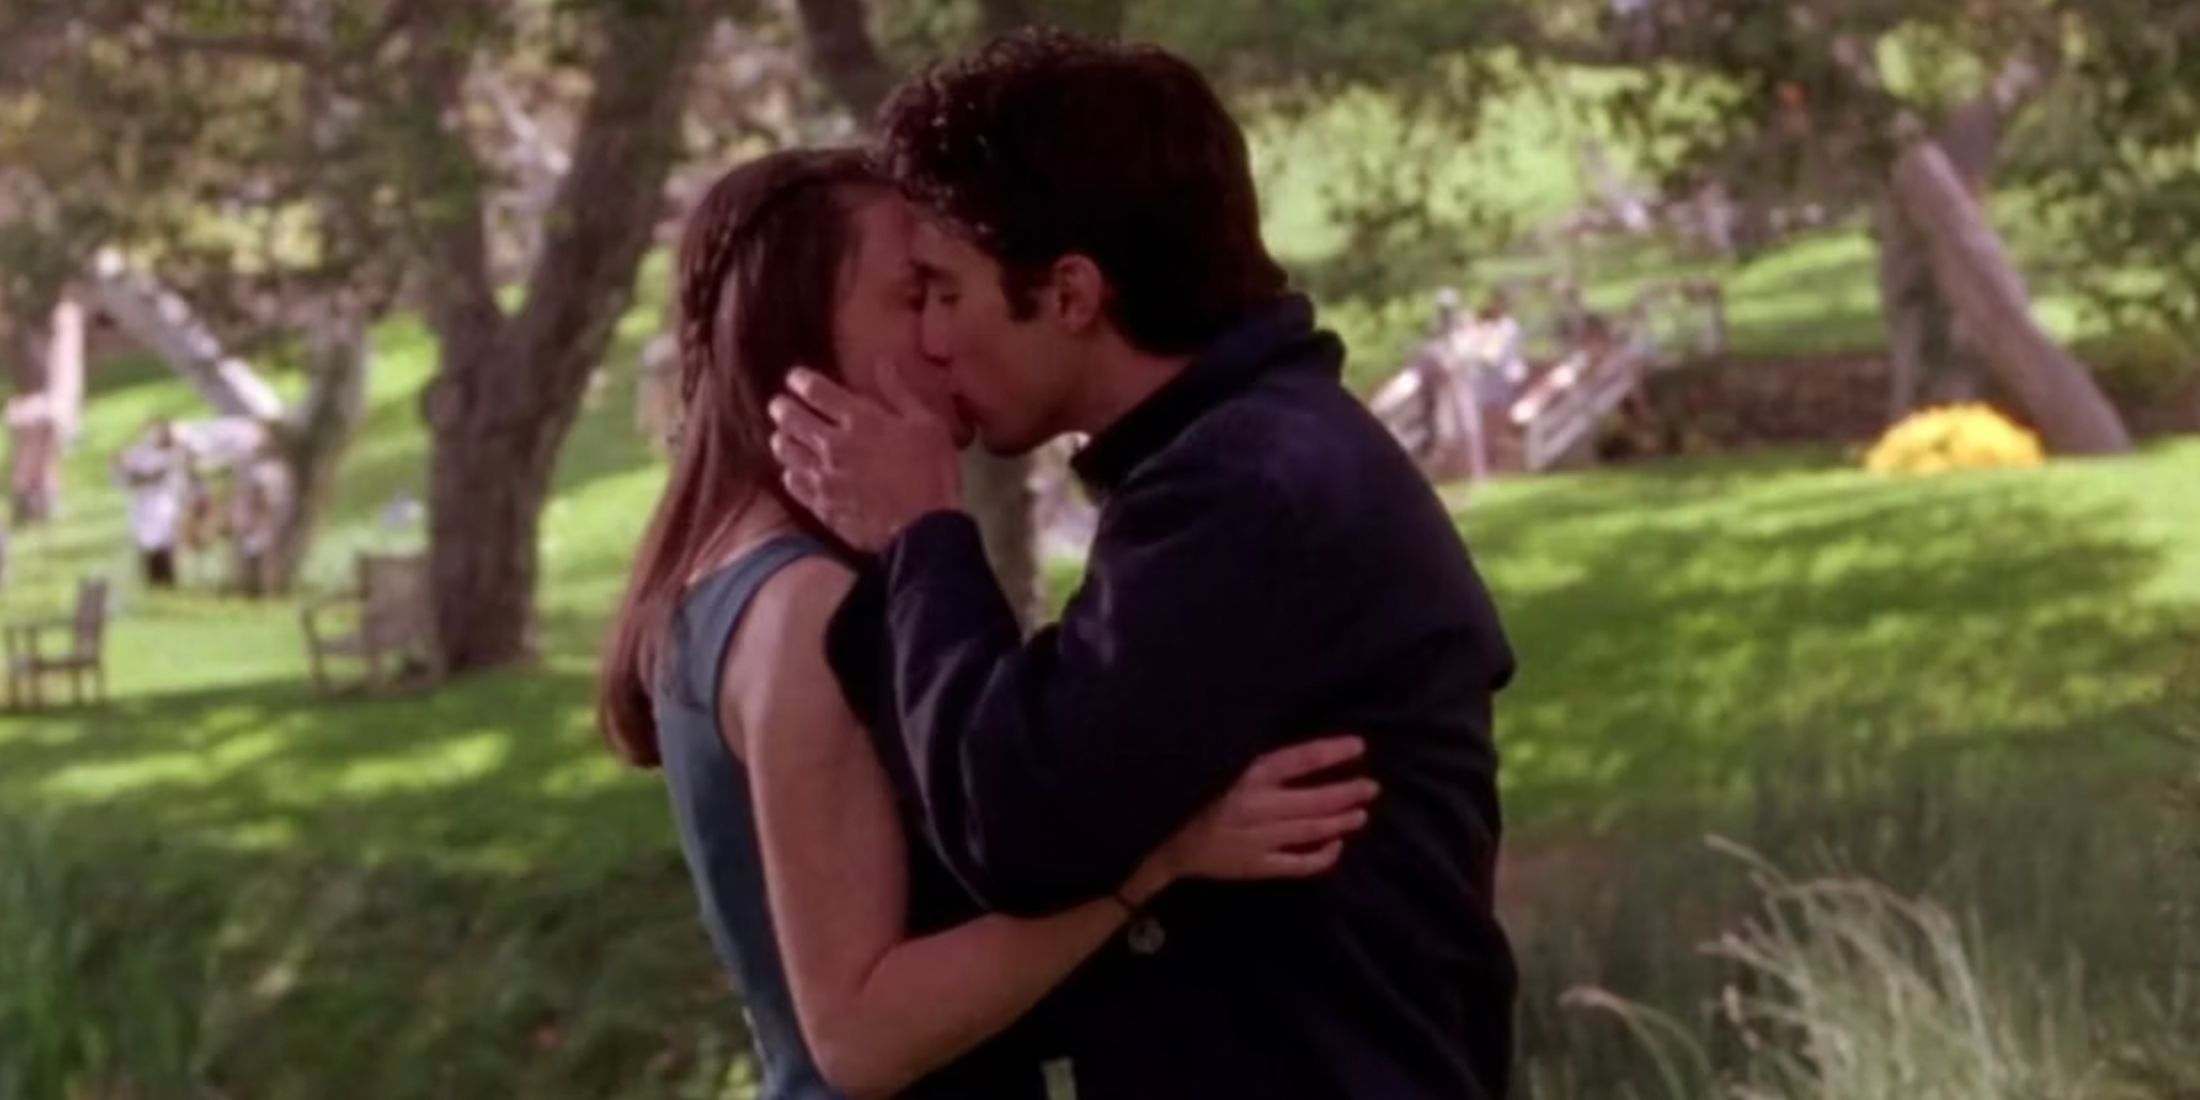 Jess kisses Rory for the first time in Gilmore Girls